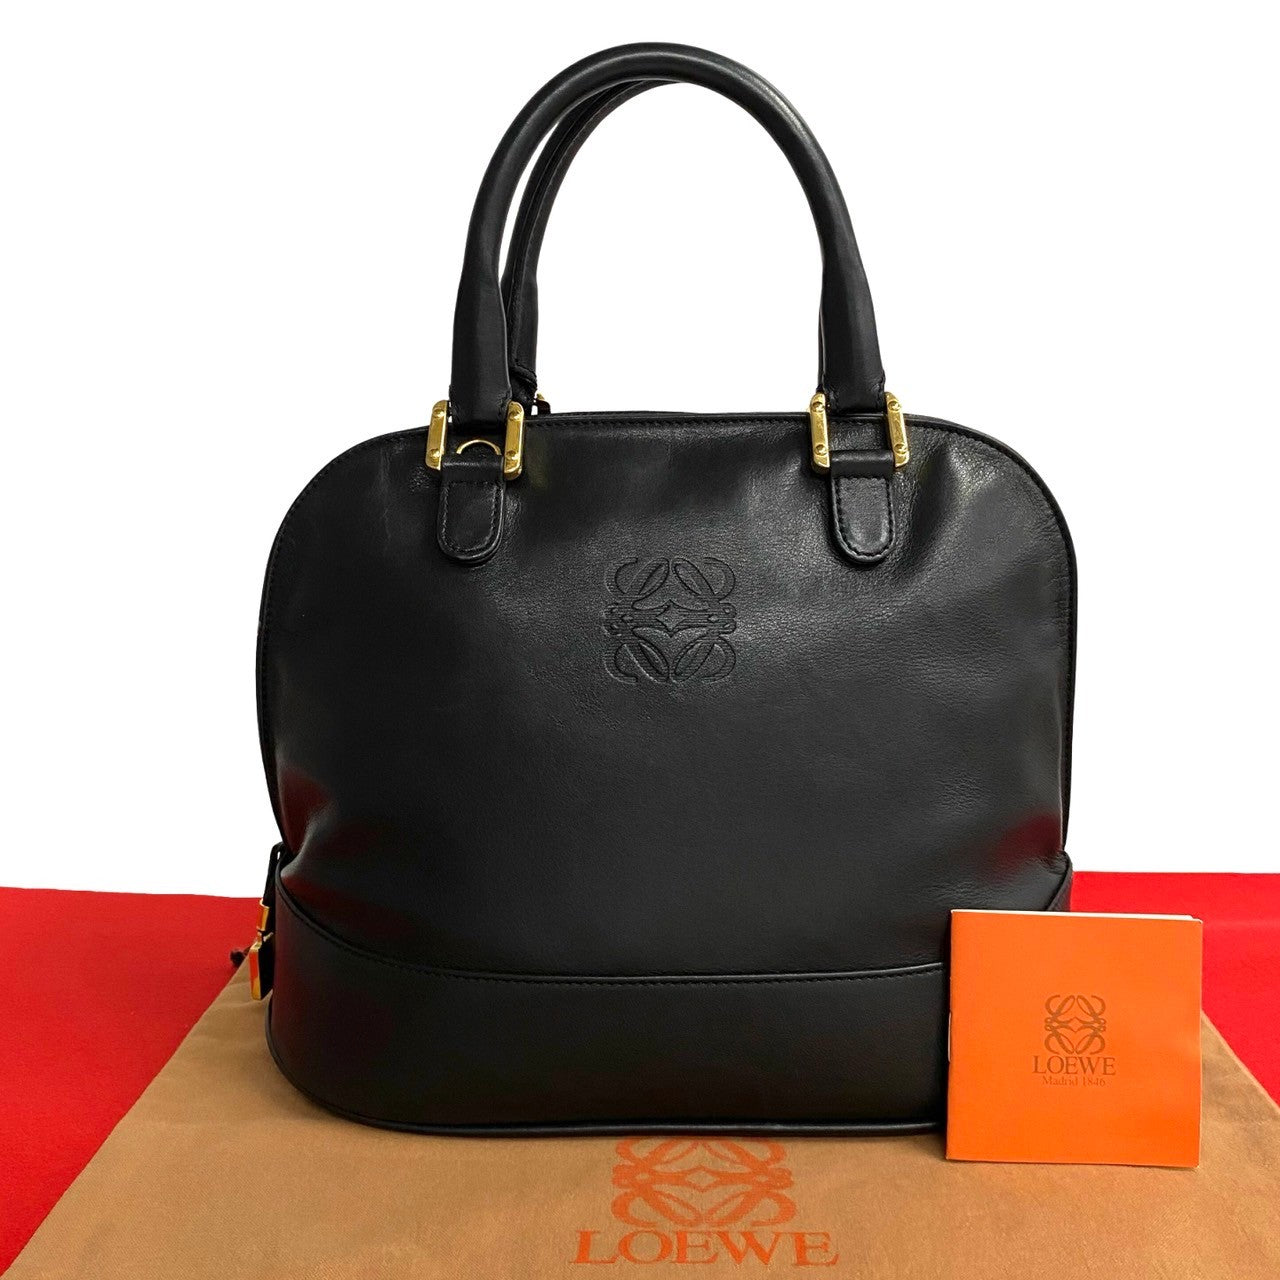 Loewe Anagram Dome Top Handle Bag  Leather Handbag 无法识别 in Good condition